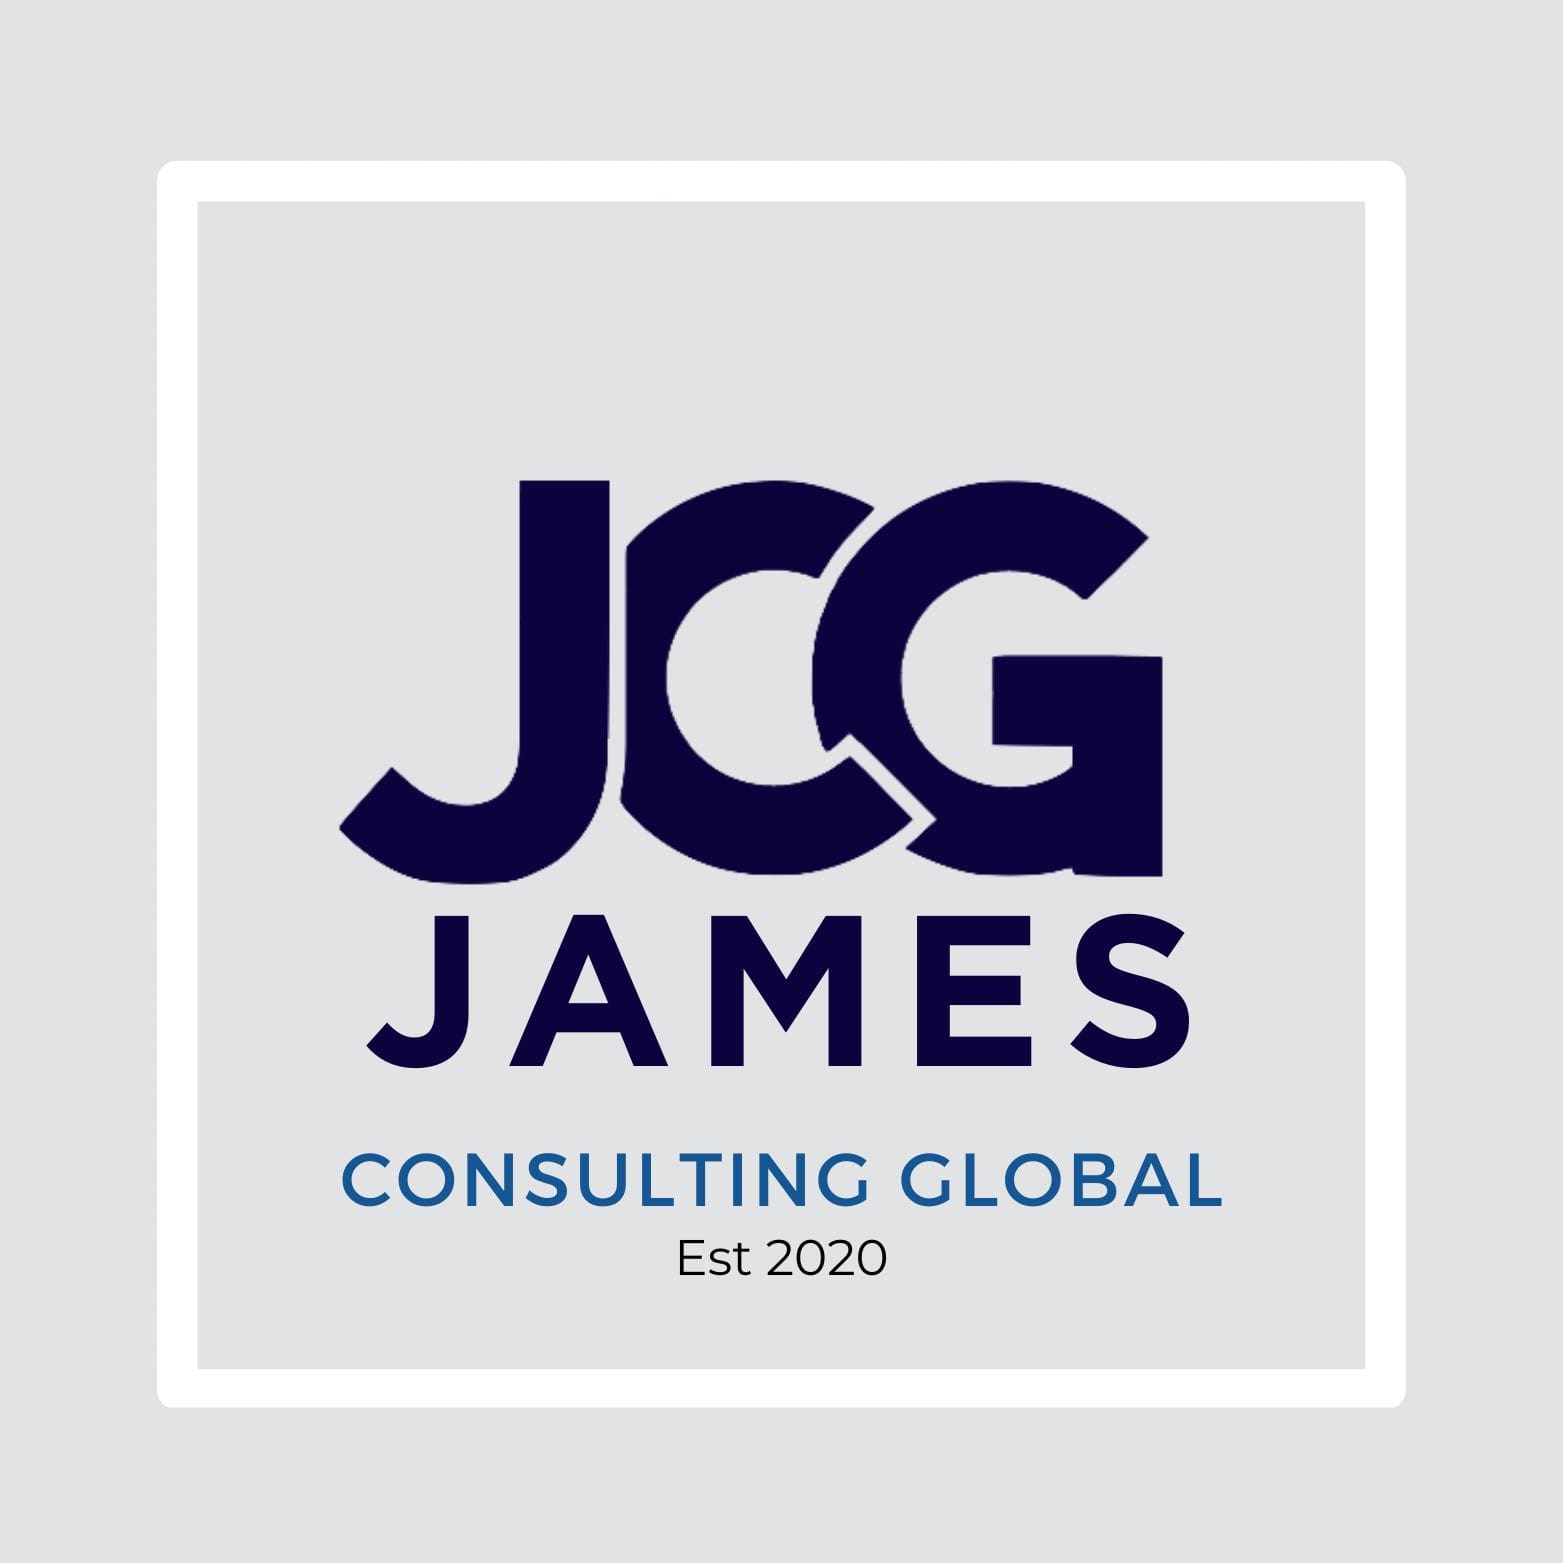 JCG (JAMES Consulting Global) square logo